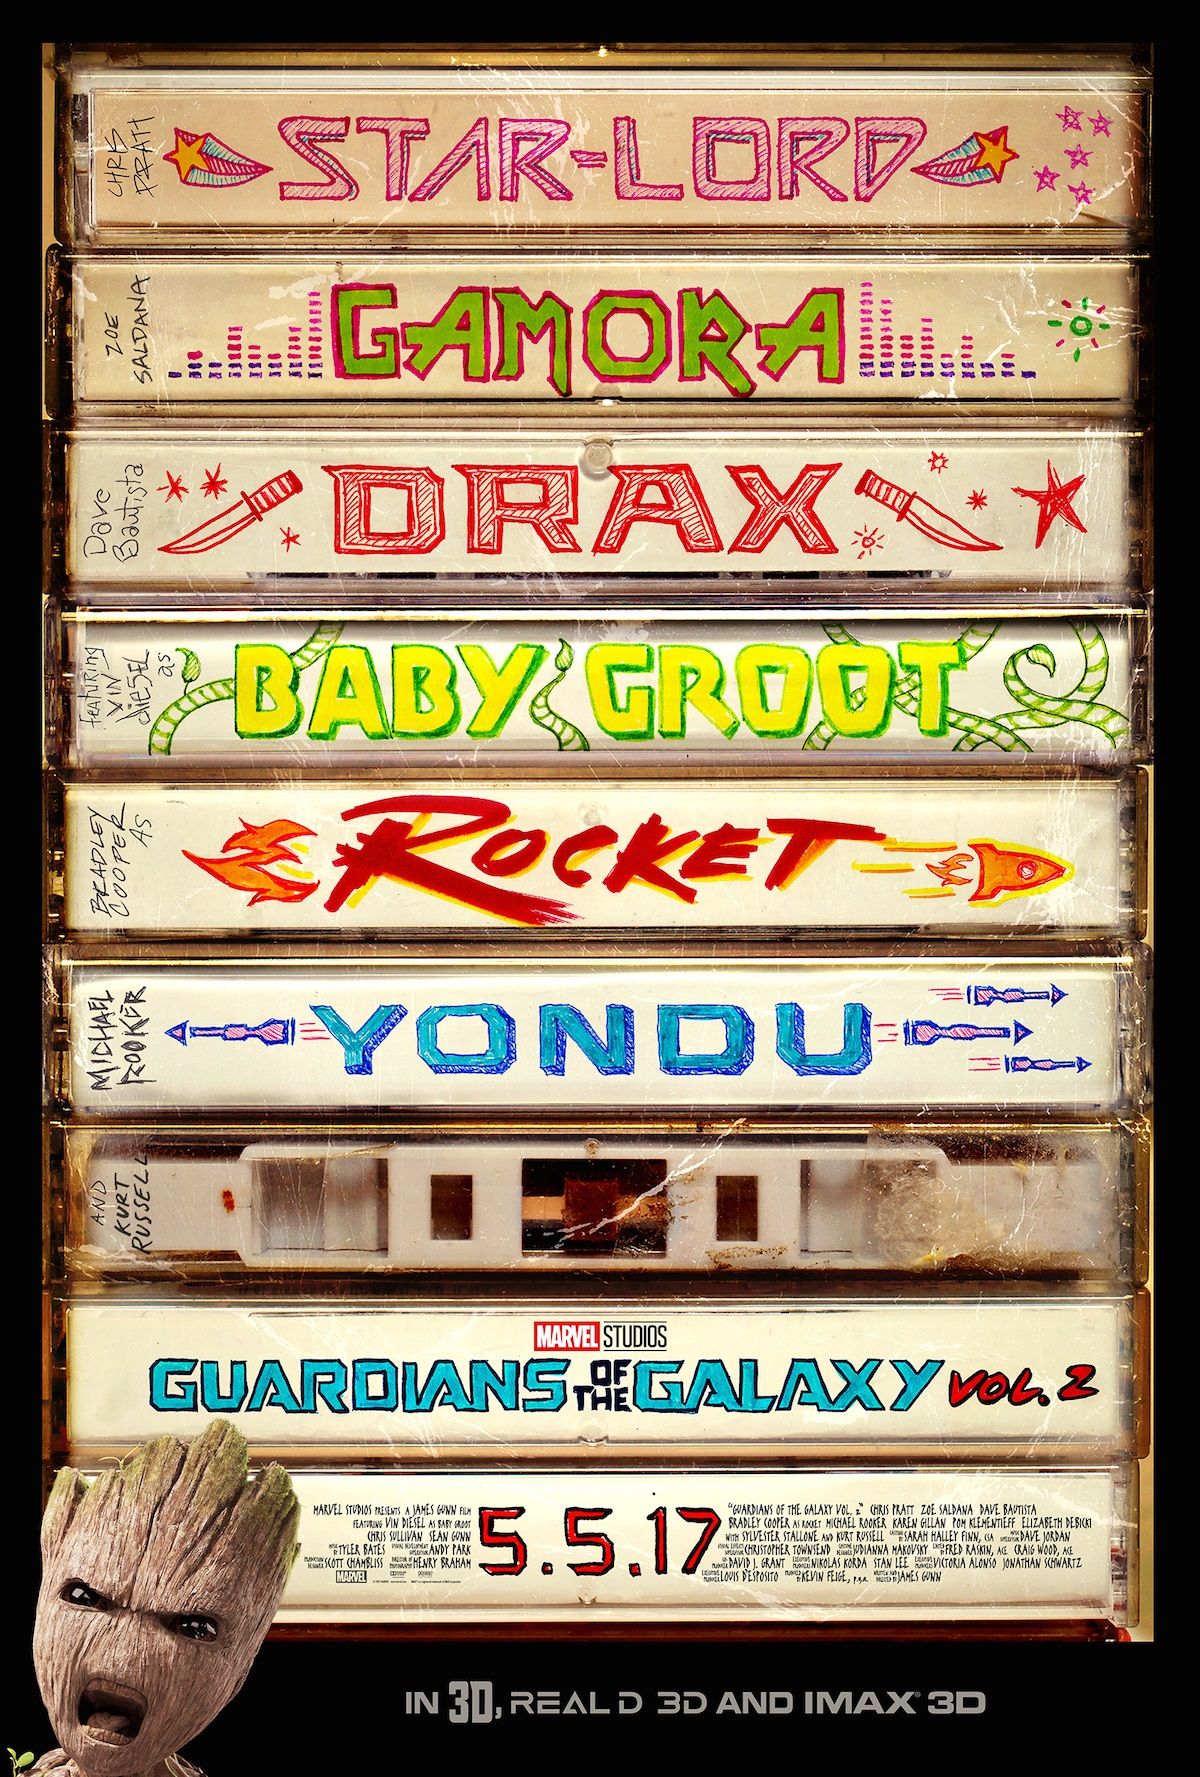 Guardians of the Galaxy 2 Banners Head Off Into the Cosmos